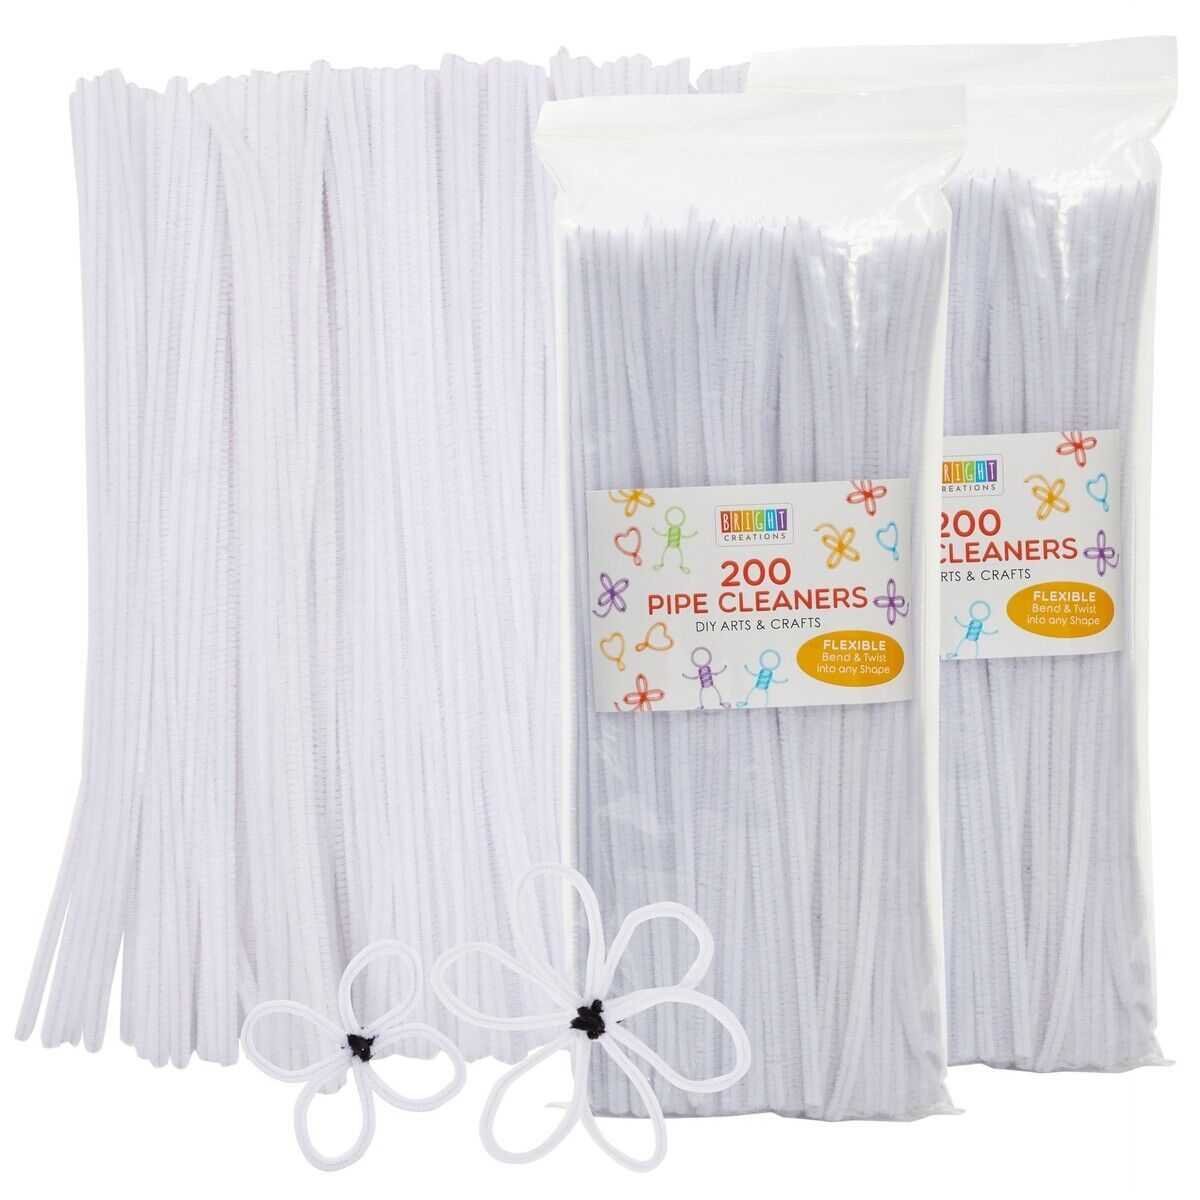 Caydo 200 Pieces White Pipe Cleaners Craft Chenille Stems for DIY Art  Creative Crafts Party Decorations (12 Inch x 6 mm)